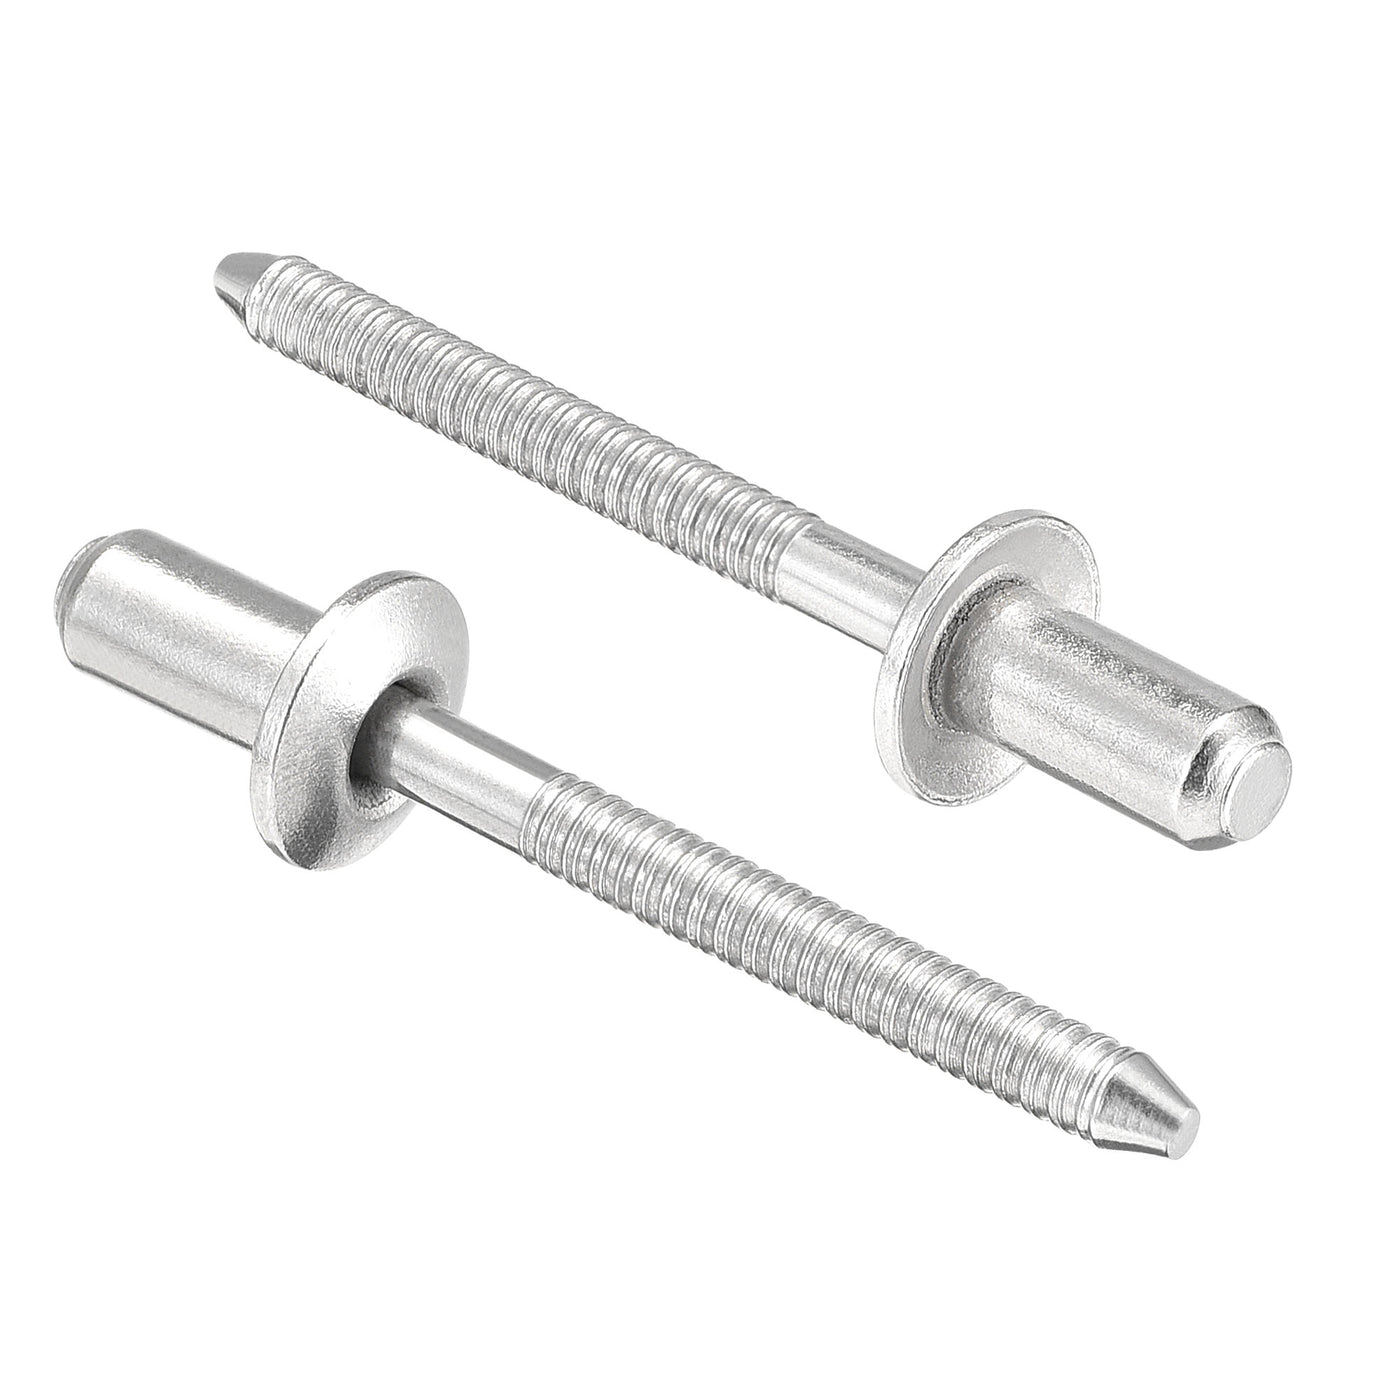 uxcell Uxcell Blind Rivets 304 Stainless Steel 4.8mm Diameter 10mm Grip Length 50pcs